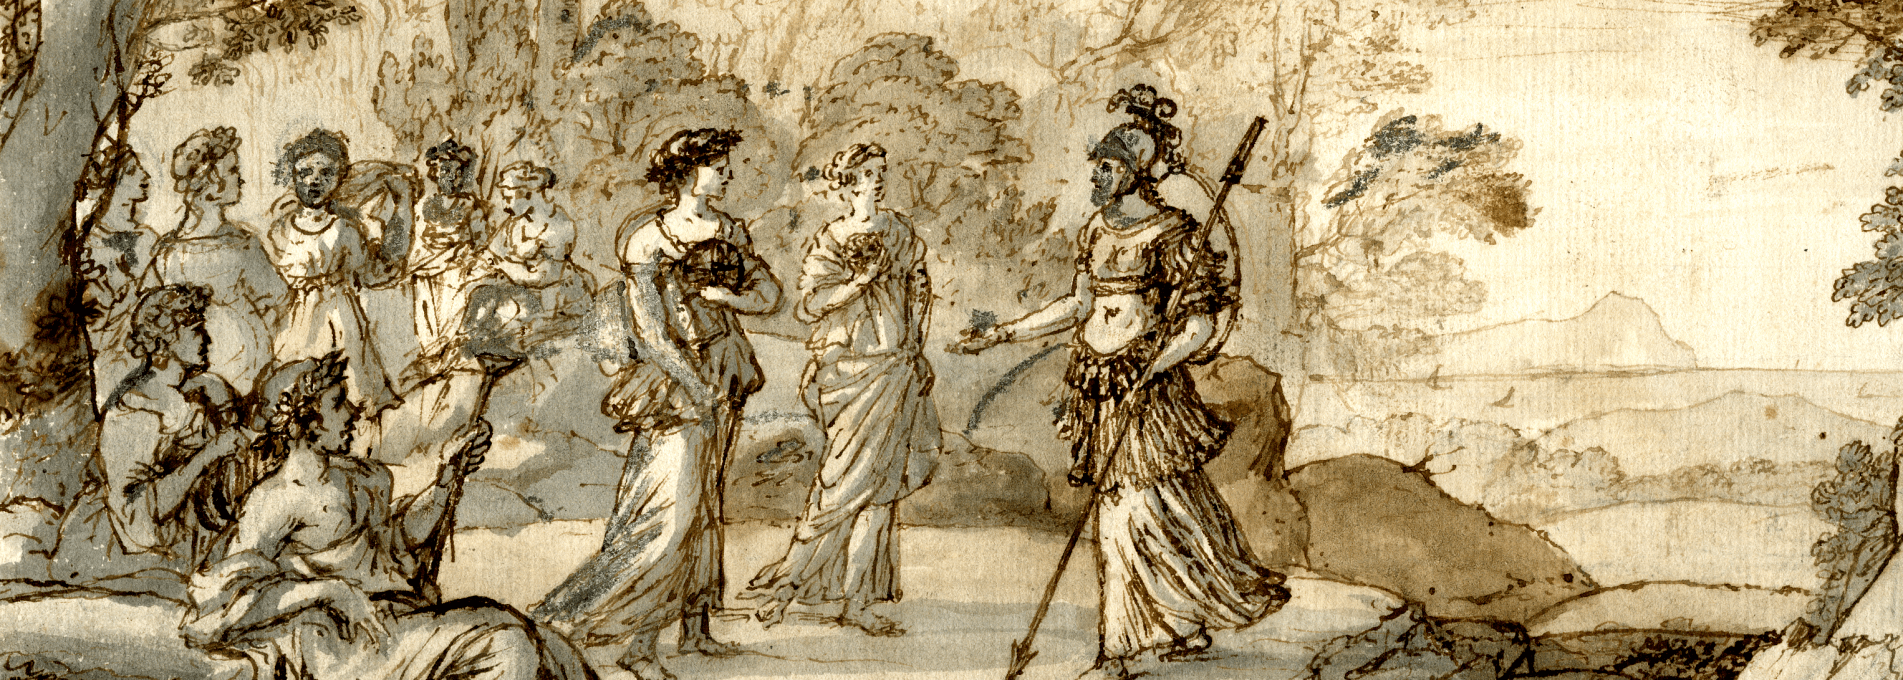 Claude Lorrain, Parnassus with Minerva visiting the Muses (detail) © The Trustees of the British Museum. Shared under a Creative Commons Attribution-NonCommercial-ShareAlike 4.0 International (CC BY-NC-SA 4.0) licence.